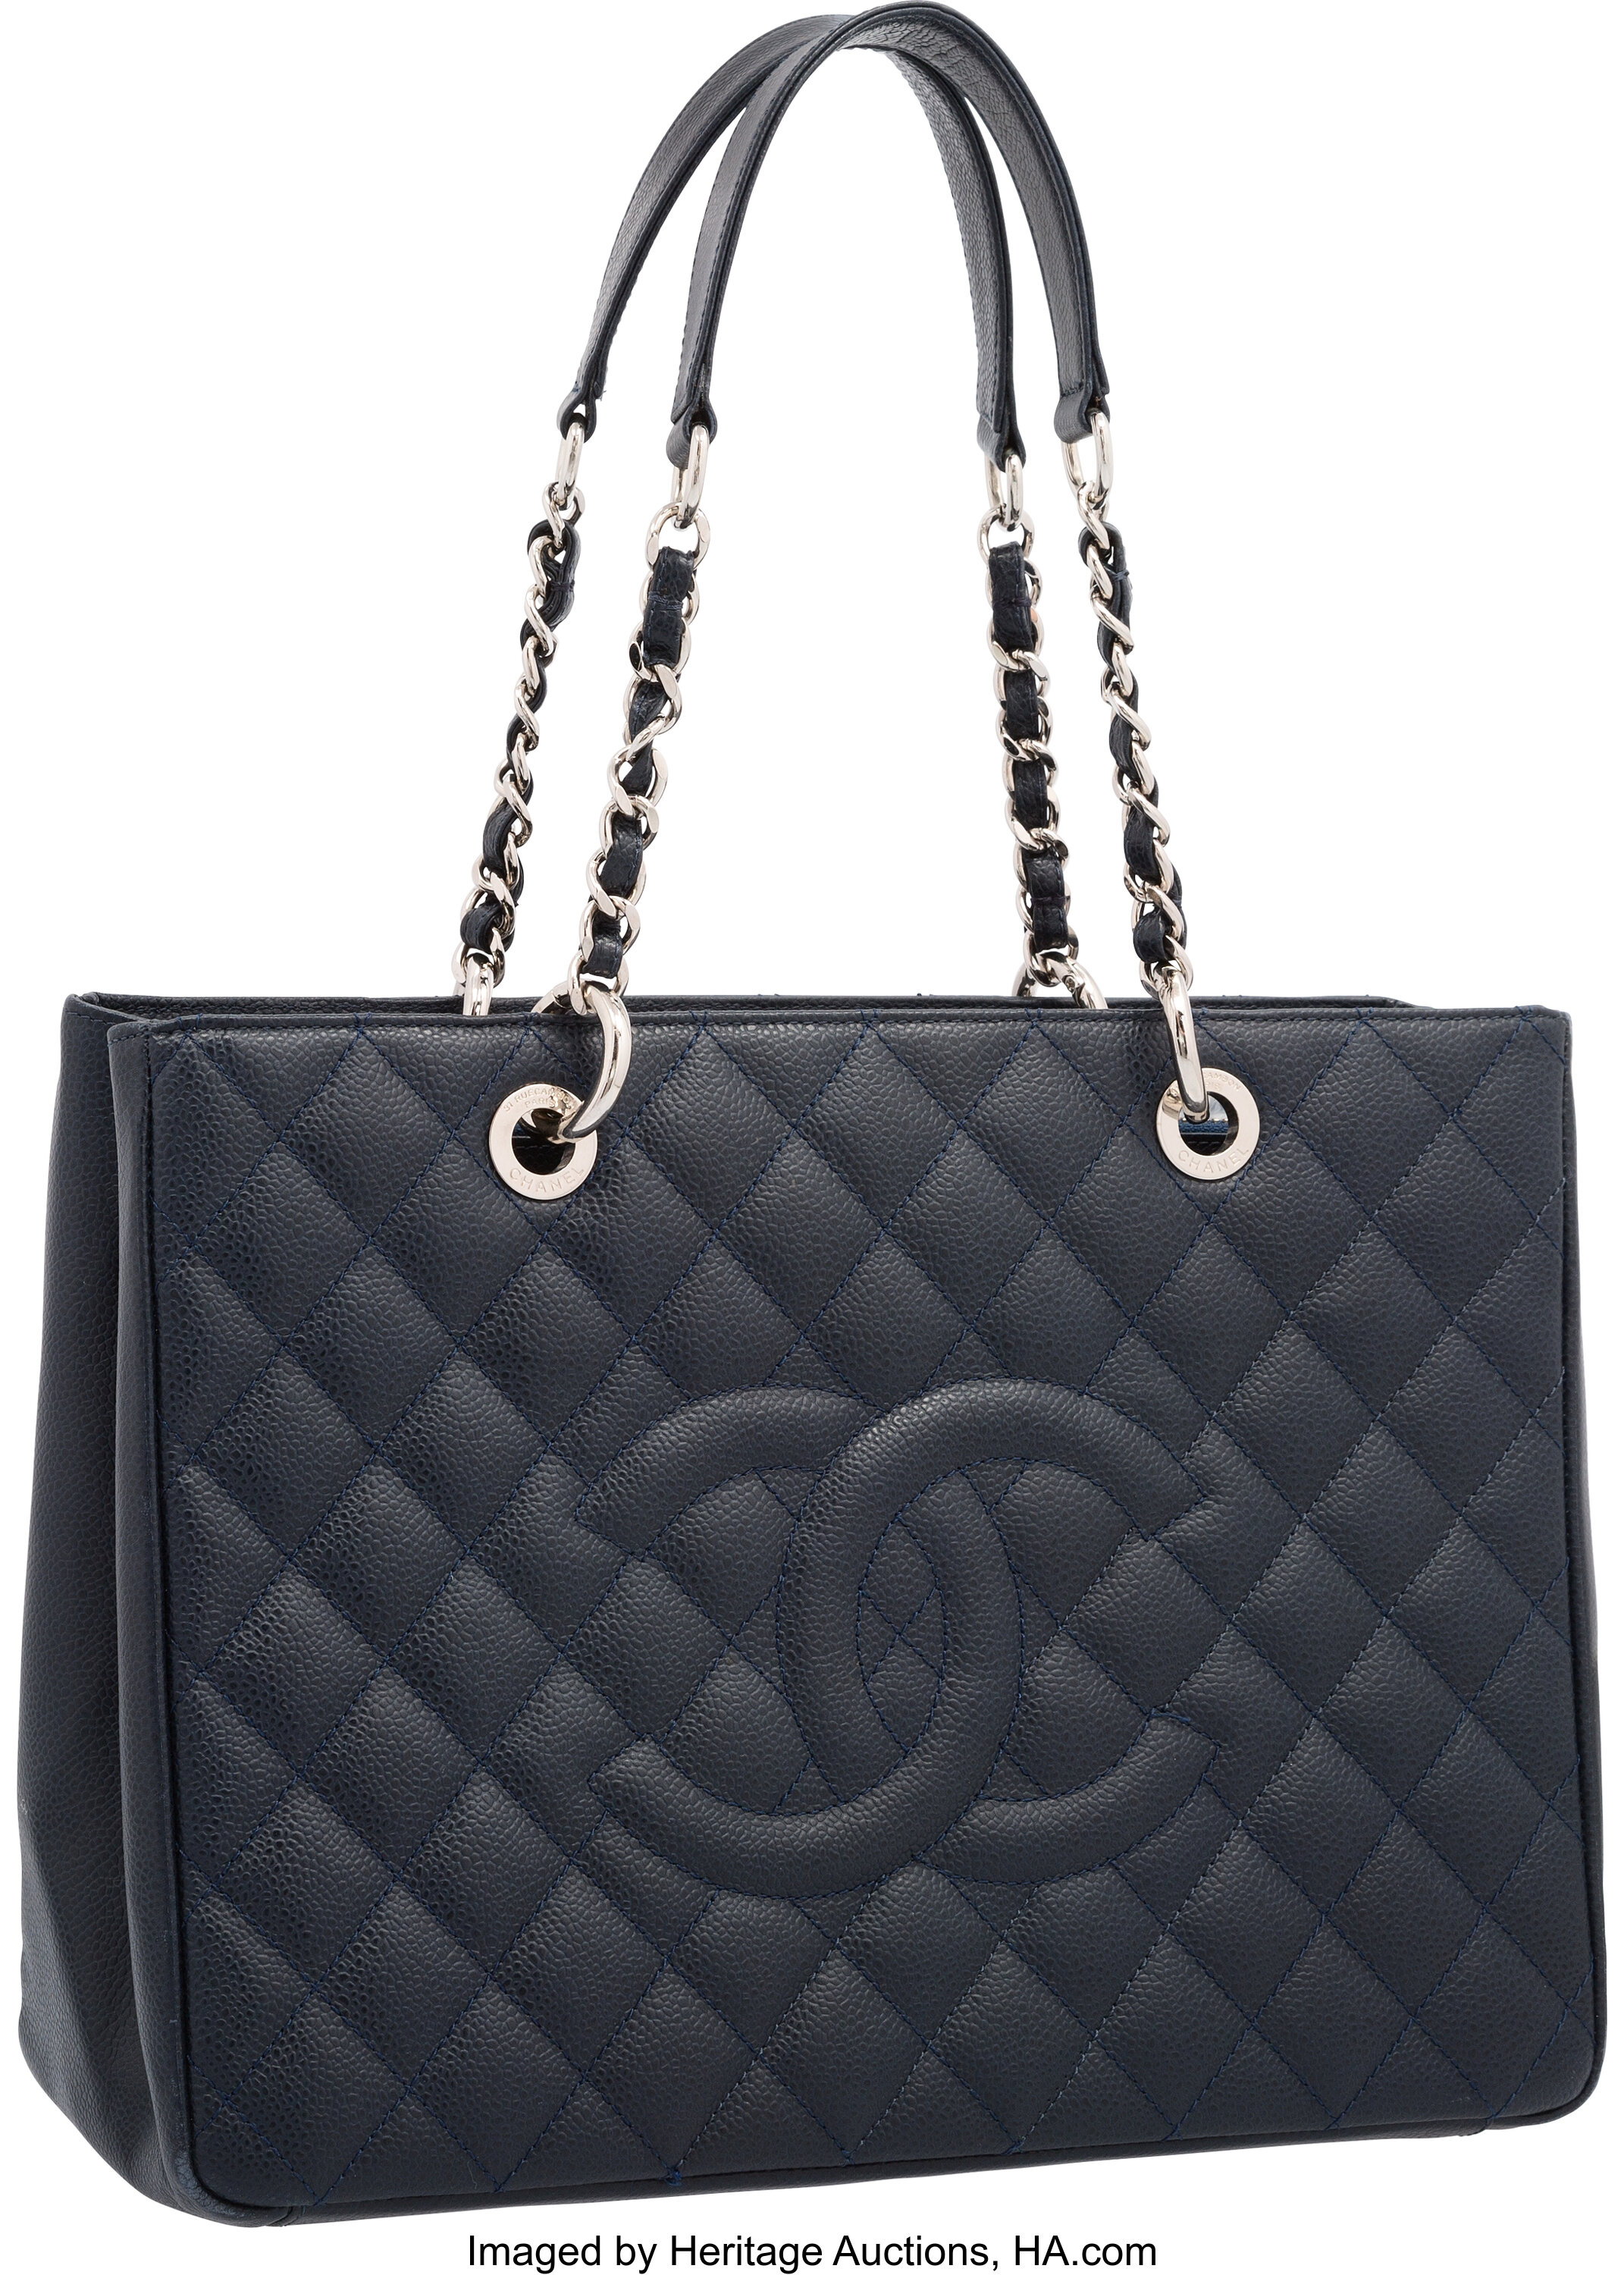 Sold at Auction: CHANEL - GST LARGE CAVIAR LEATHER TOTE BAG - EMBROIDERED  CC LOGO